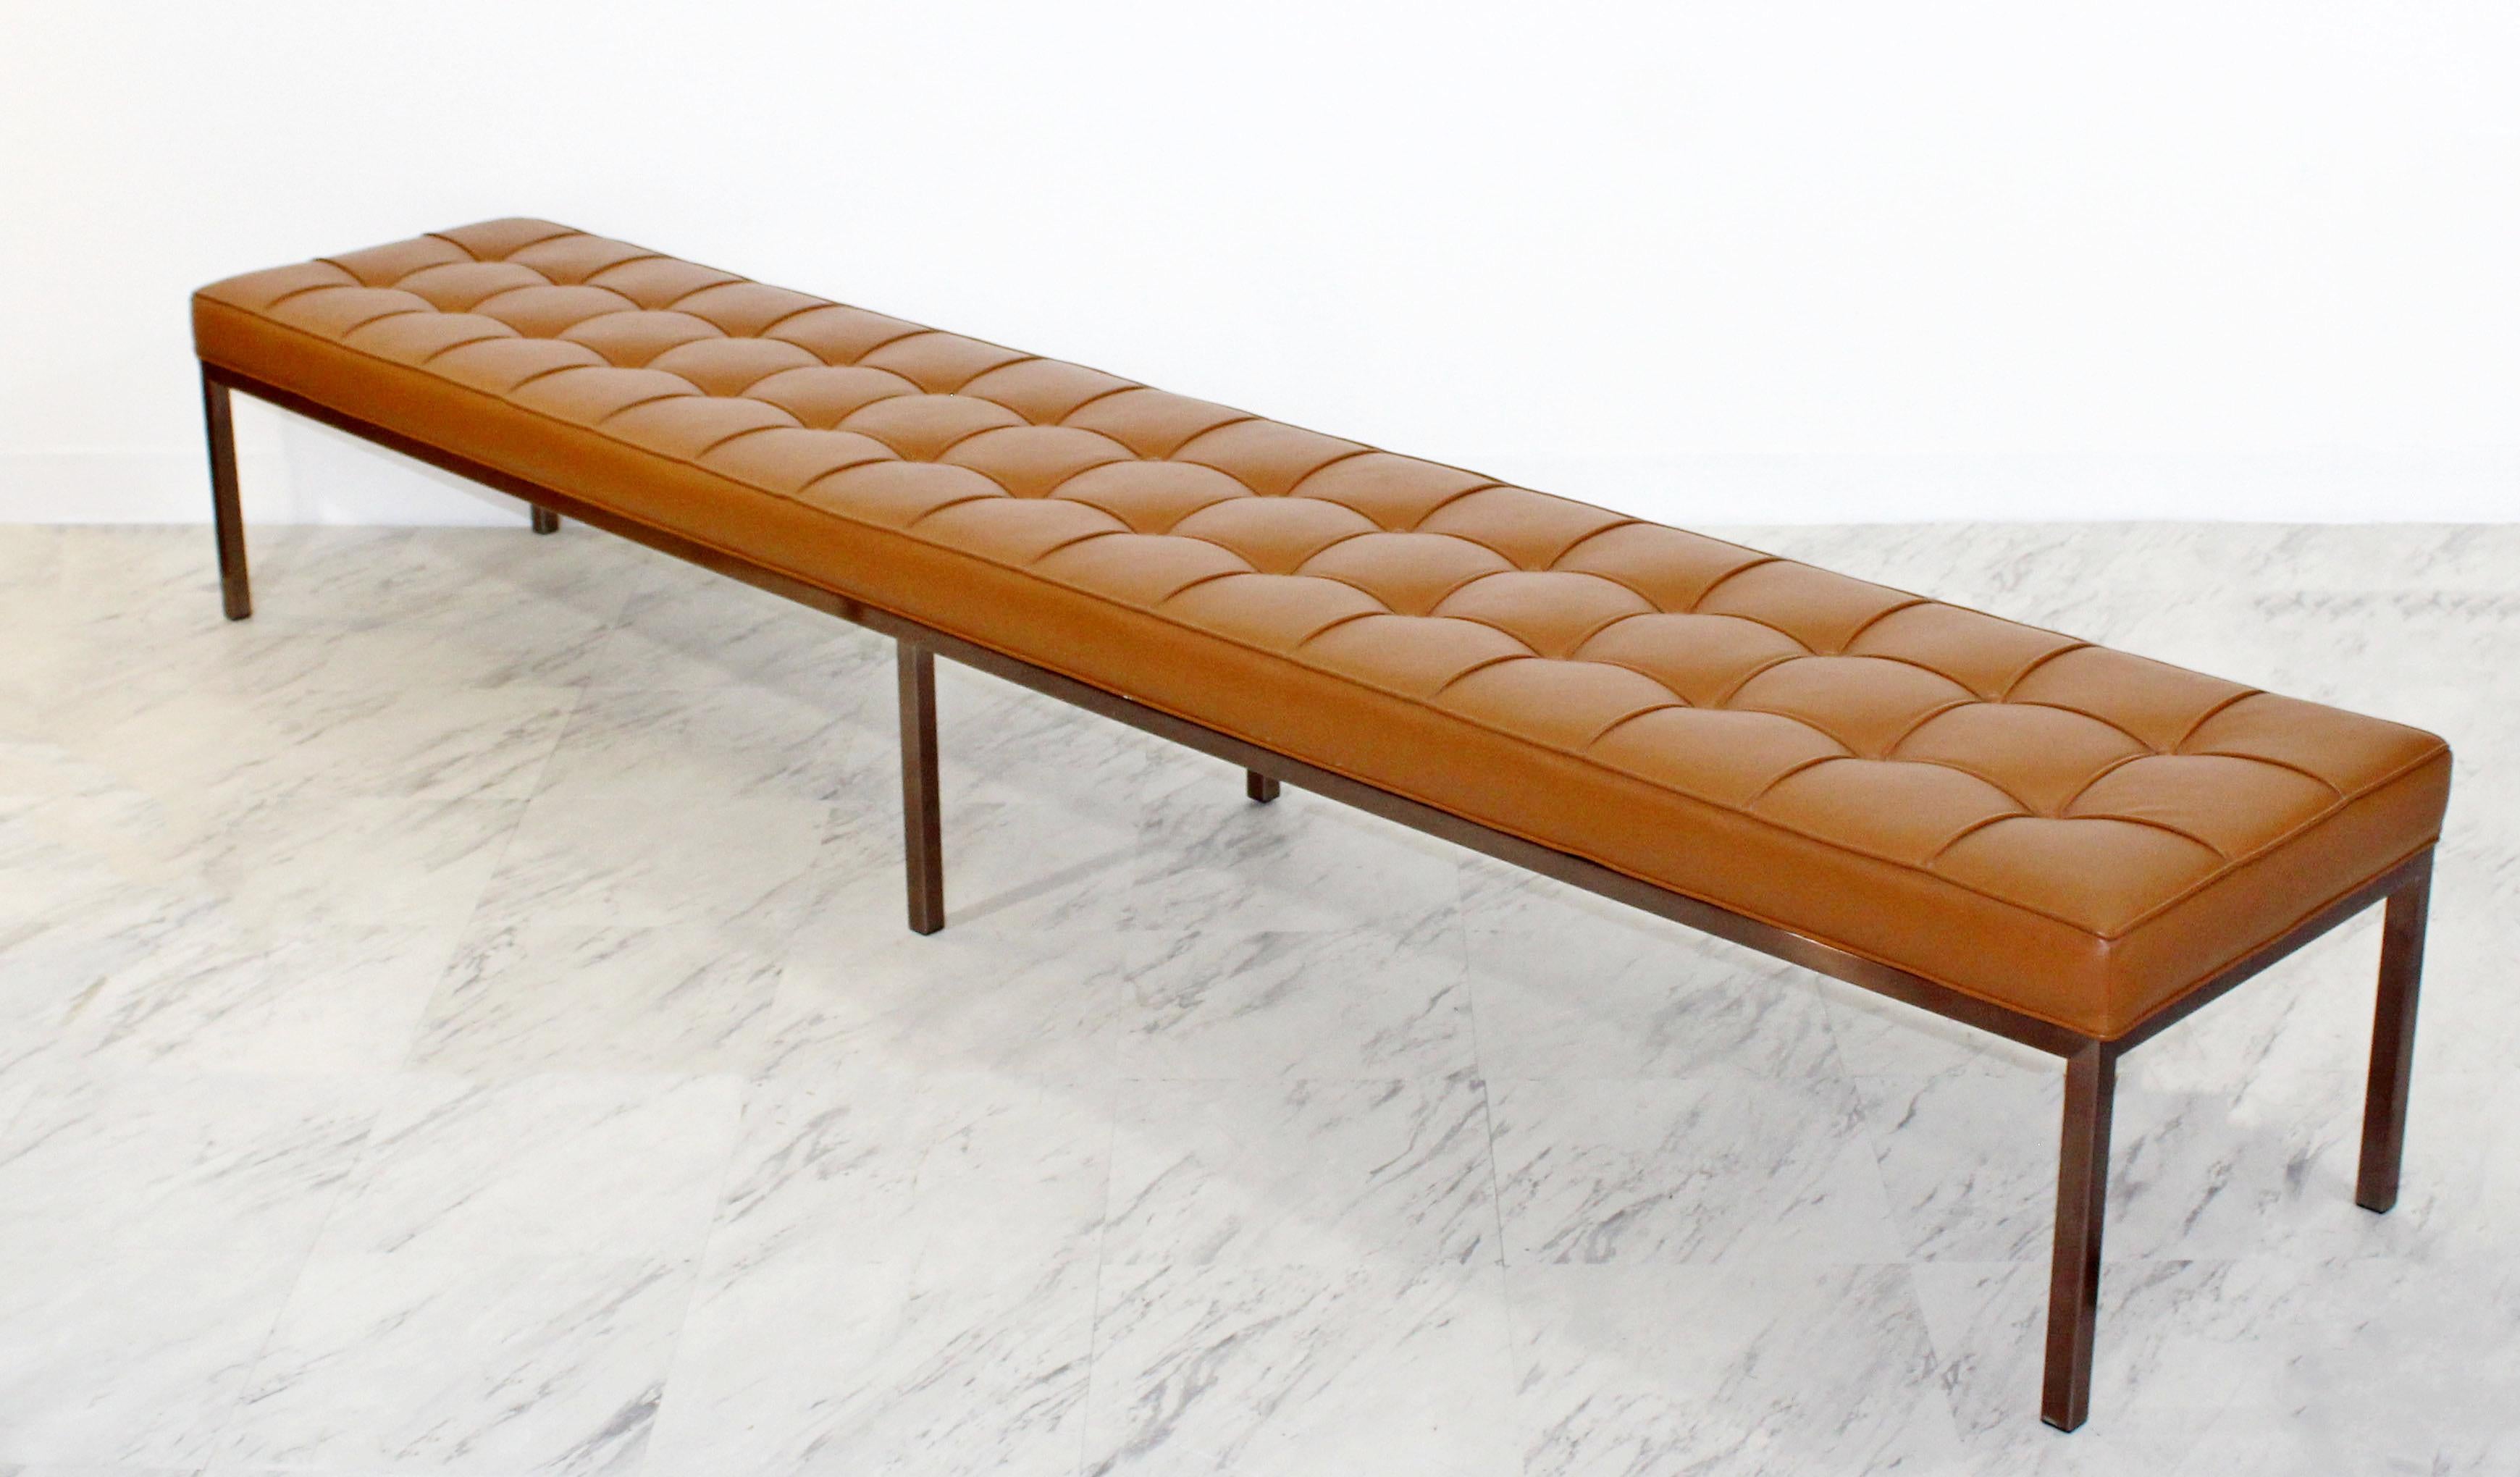 For your consideration is a marvelous X-long museum tufted cognac brown leather bench, on a bronze finished base, circa the 1970s. In excellent condition. The dimensions are 96